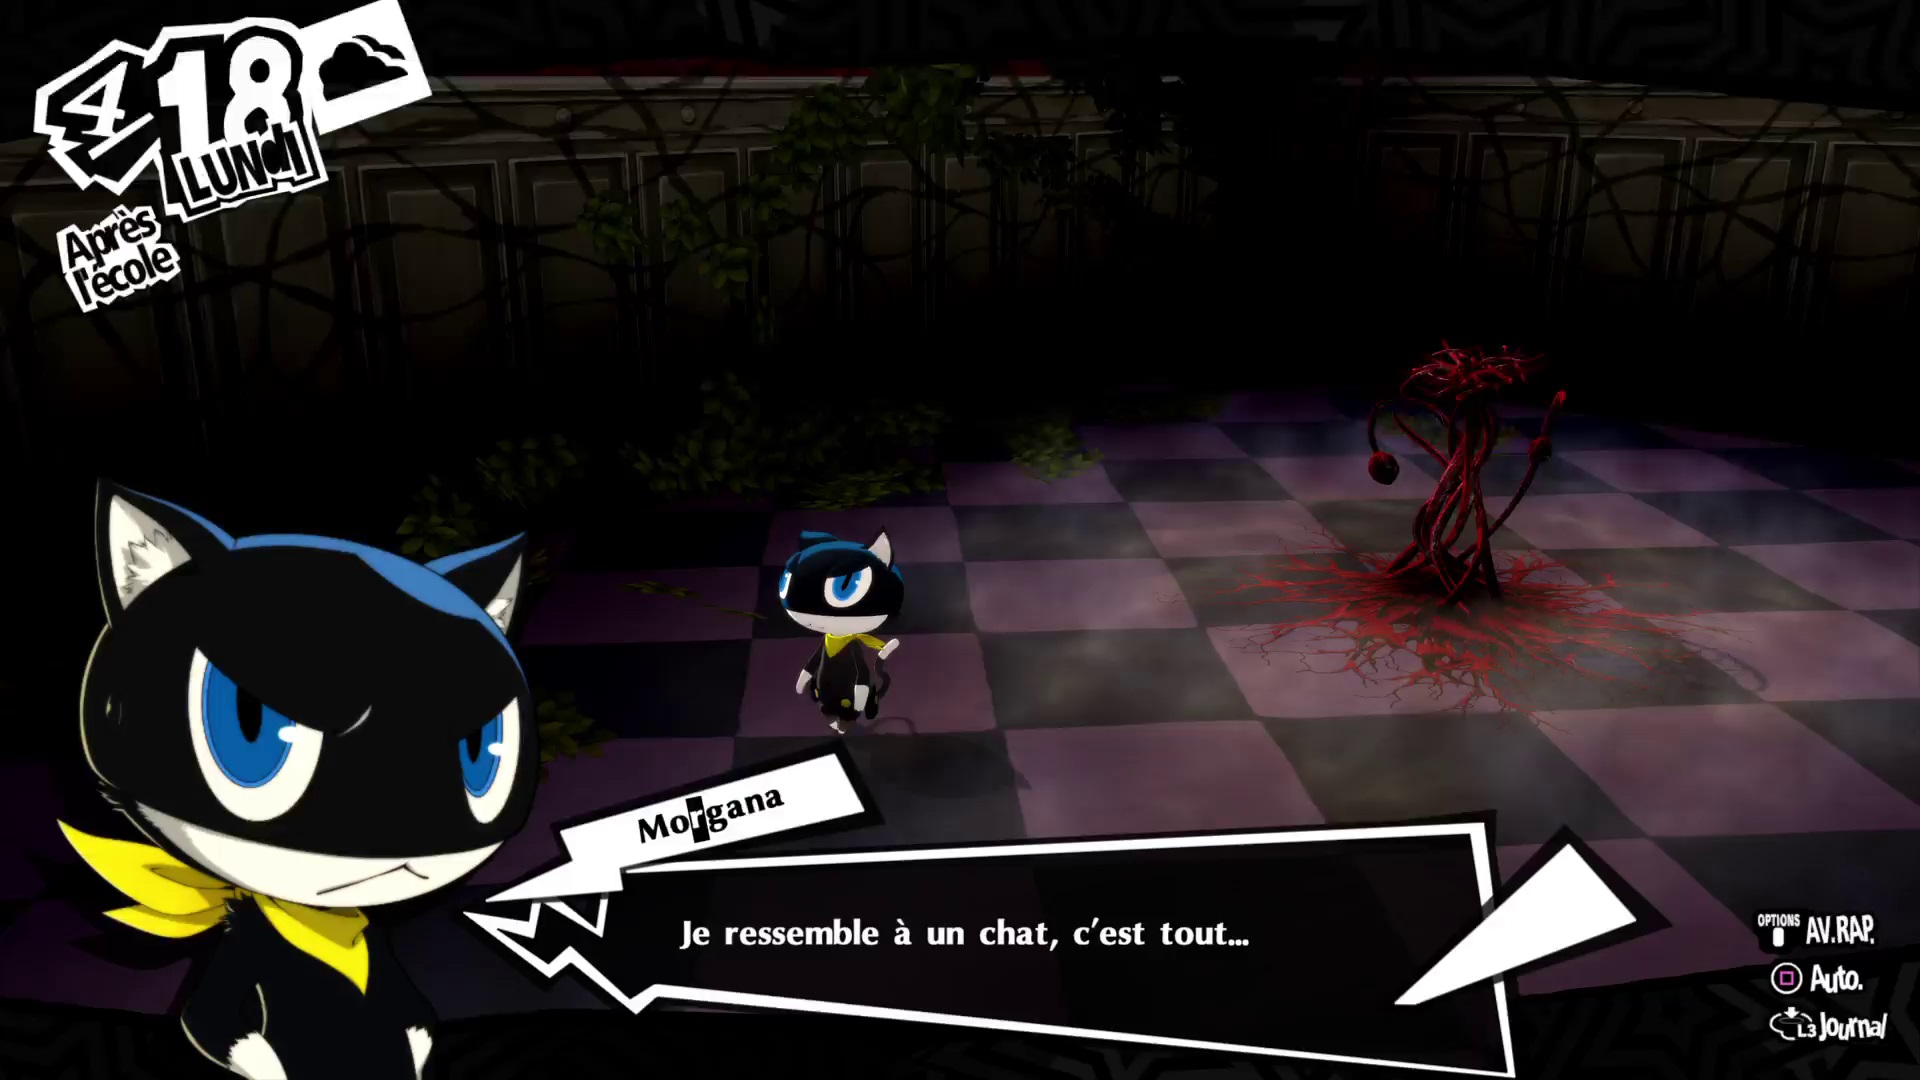 Persona 5 royale preview 01 1